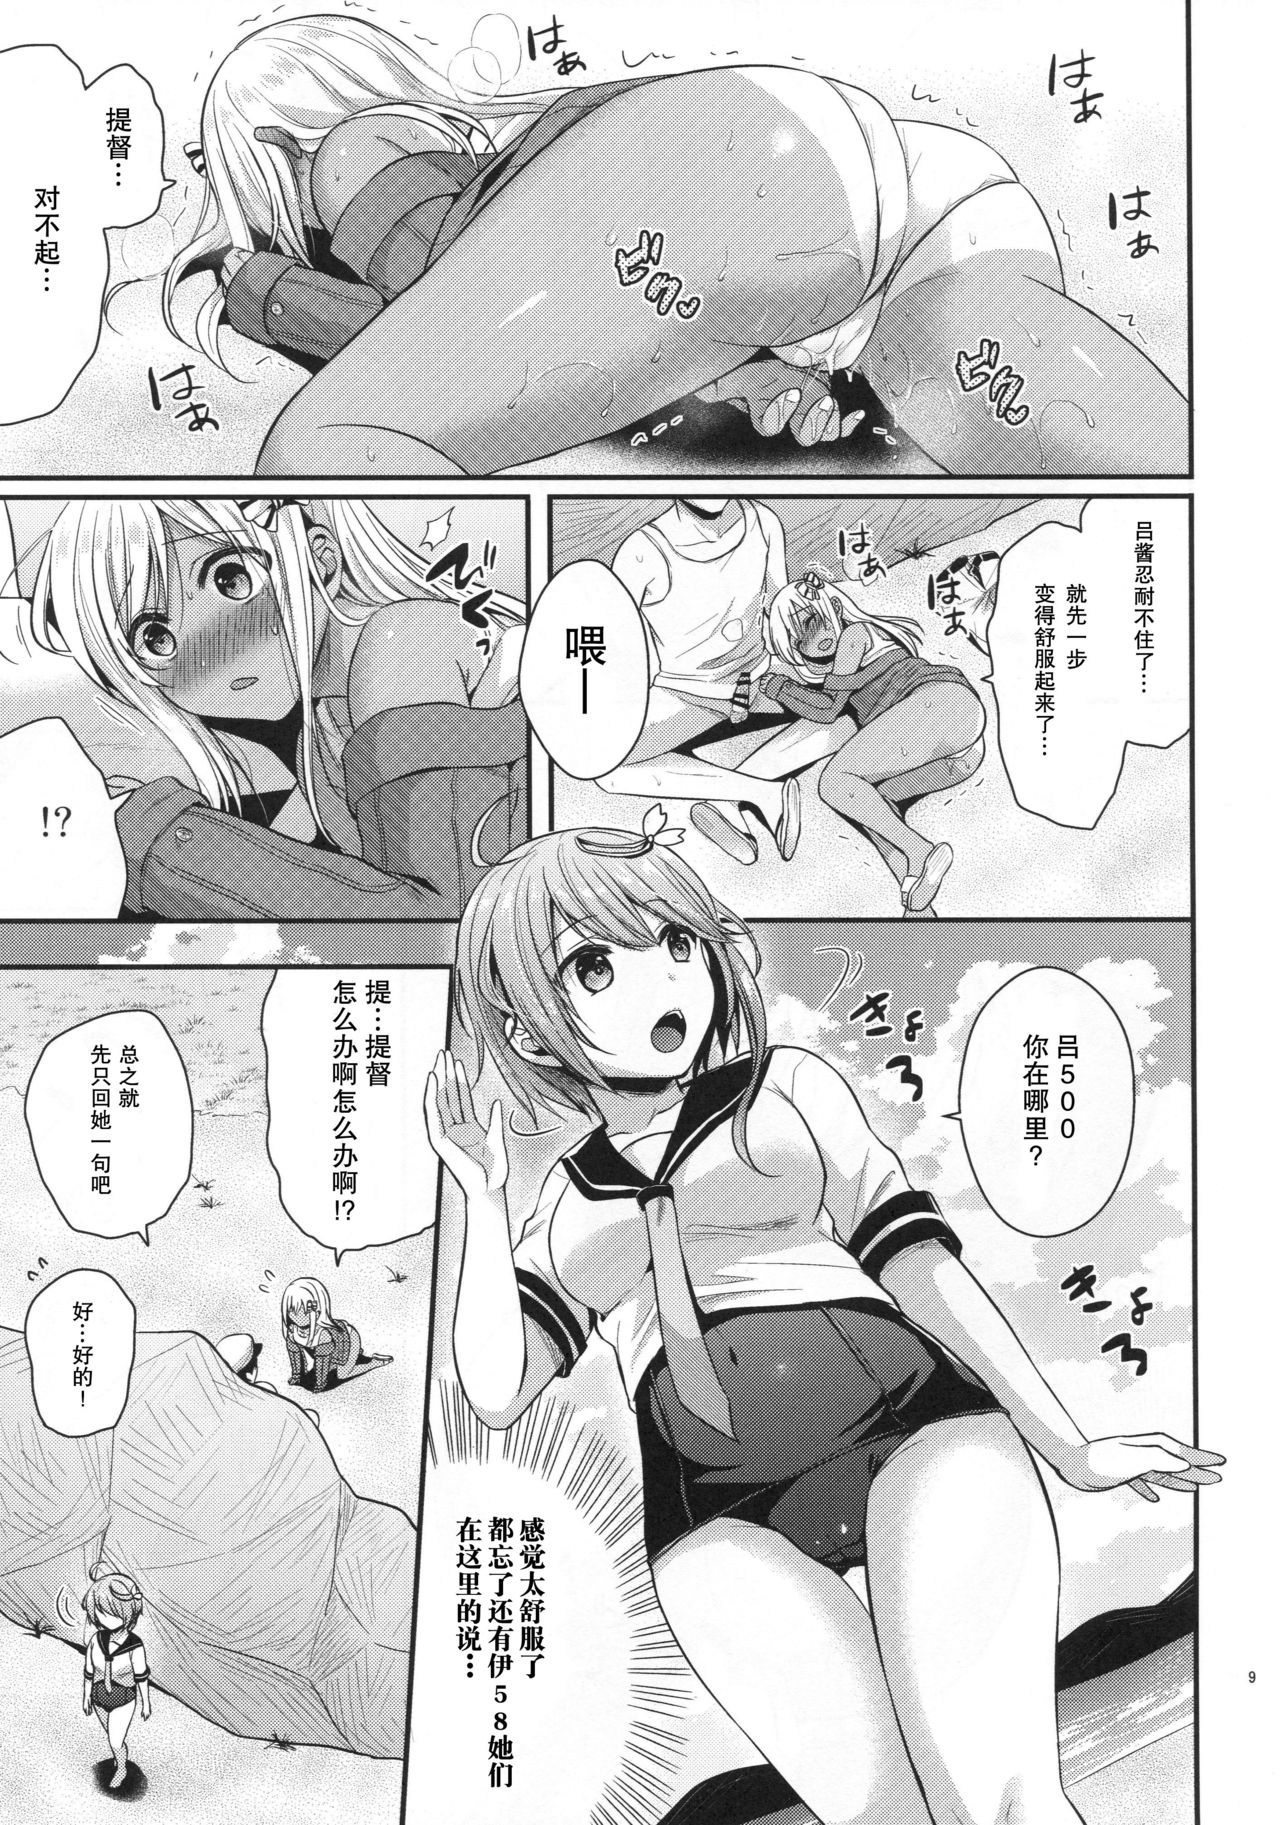 (C95) [Proom (Pei)] Ro-chan to himegoto (Kantai Collection -KanColle-) [Chinese] [胸垫汉化组] page 9 full